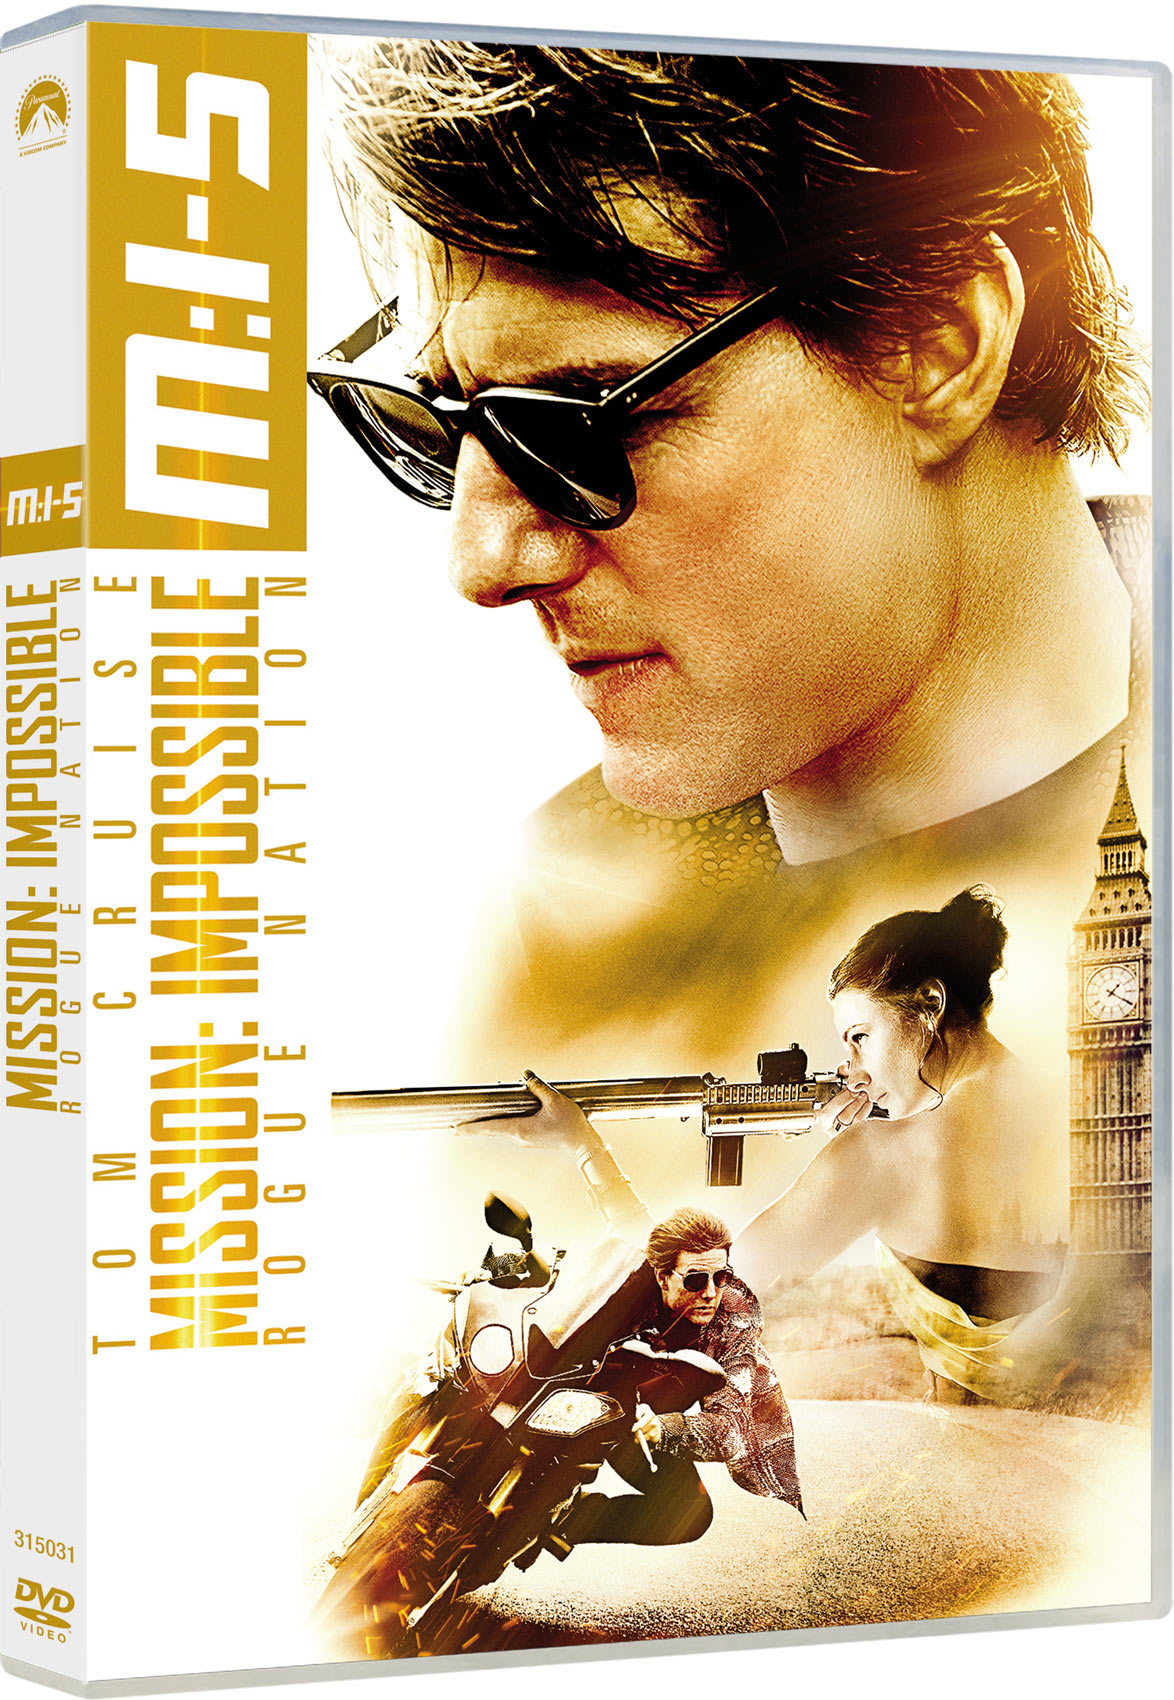 MISSION IMPOSSIBLE V ROGUE NATION